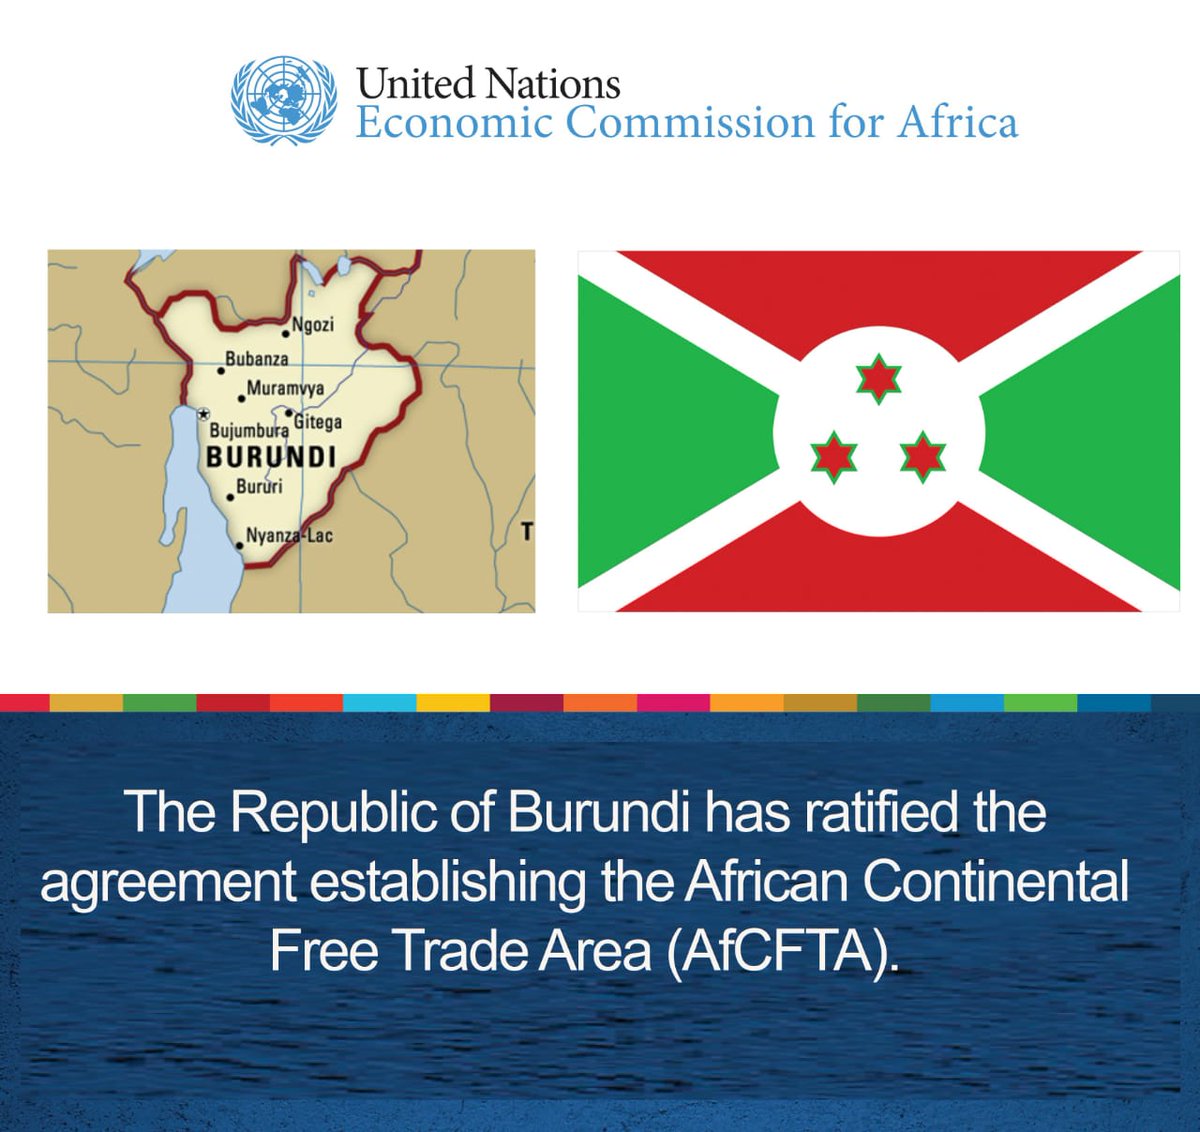 Congratulations to Burundi for ratifying the #AfCFTA, joining the list of countries that have completed their domestic requirements for ratification. We are hopeful that all 55 countries will soon sign & ratify the AfCFTA. #afcfta #internationaltrade #commonmarkets #freetradezone